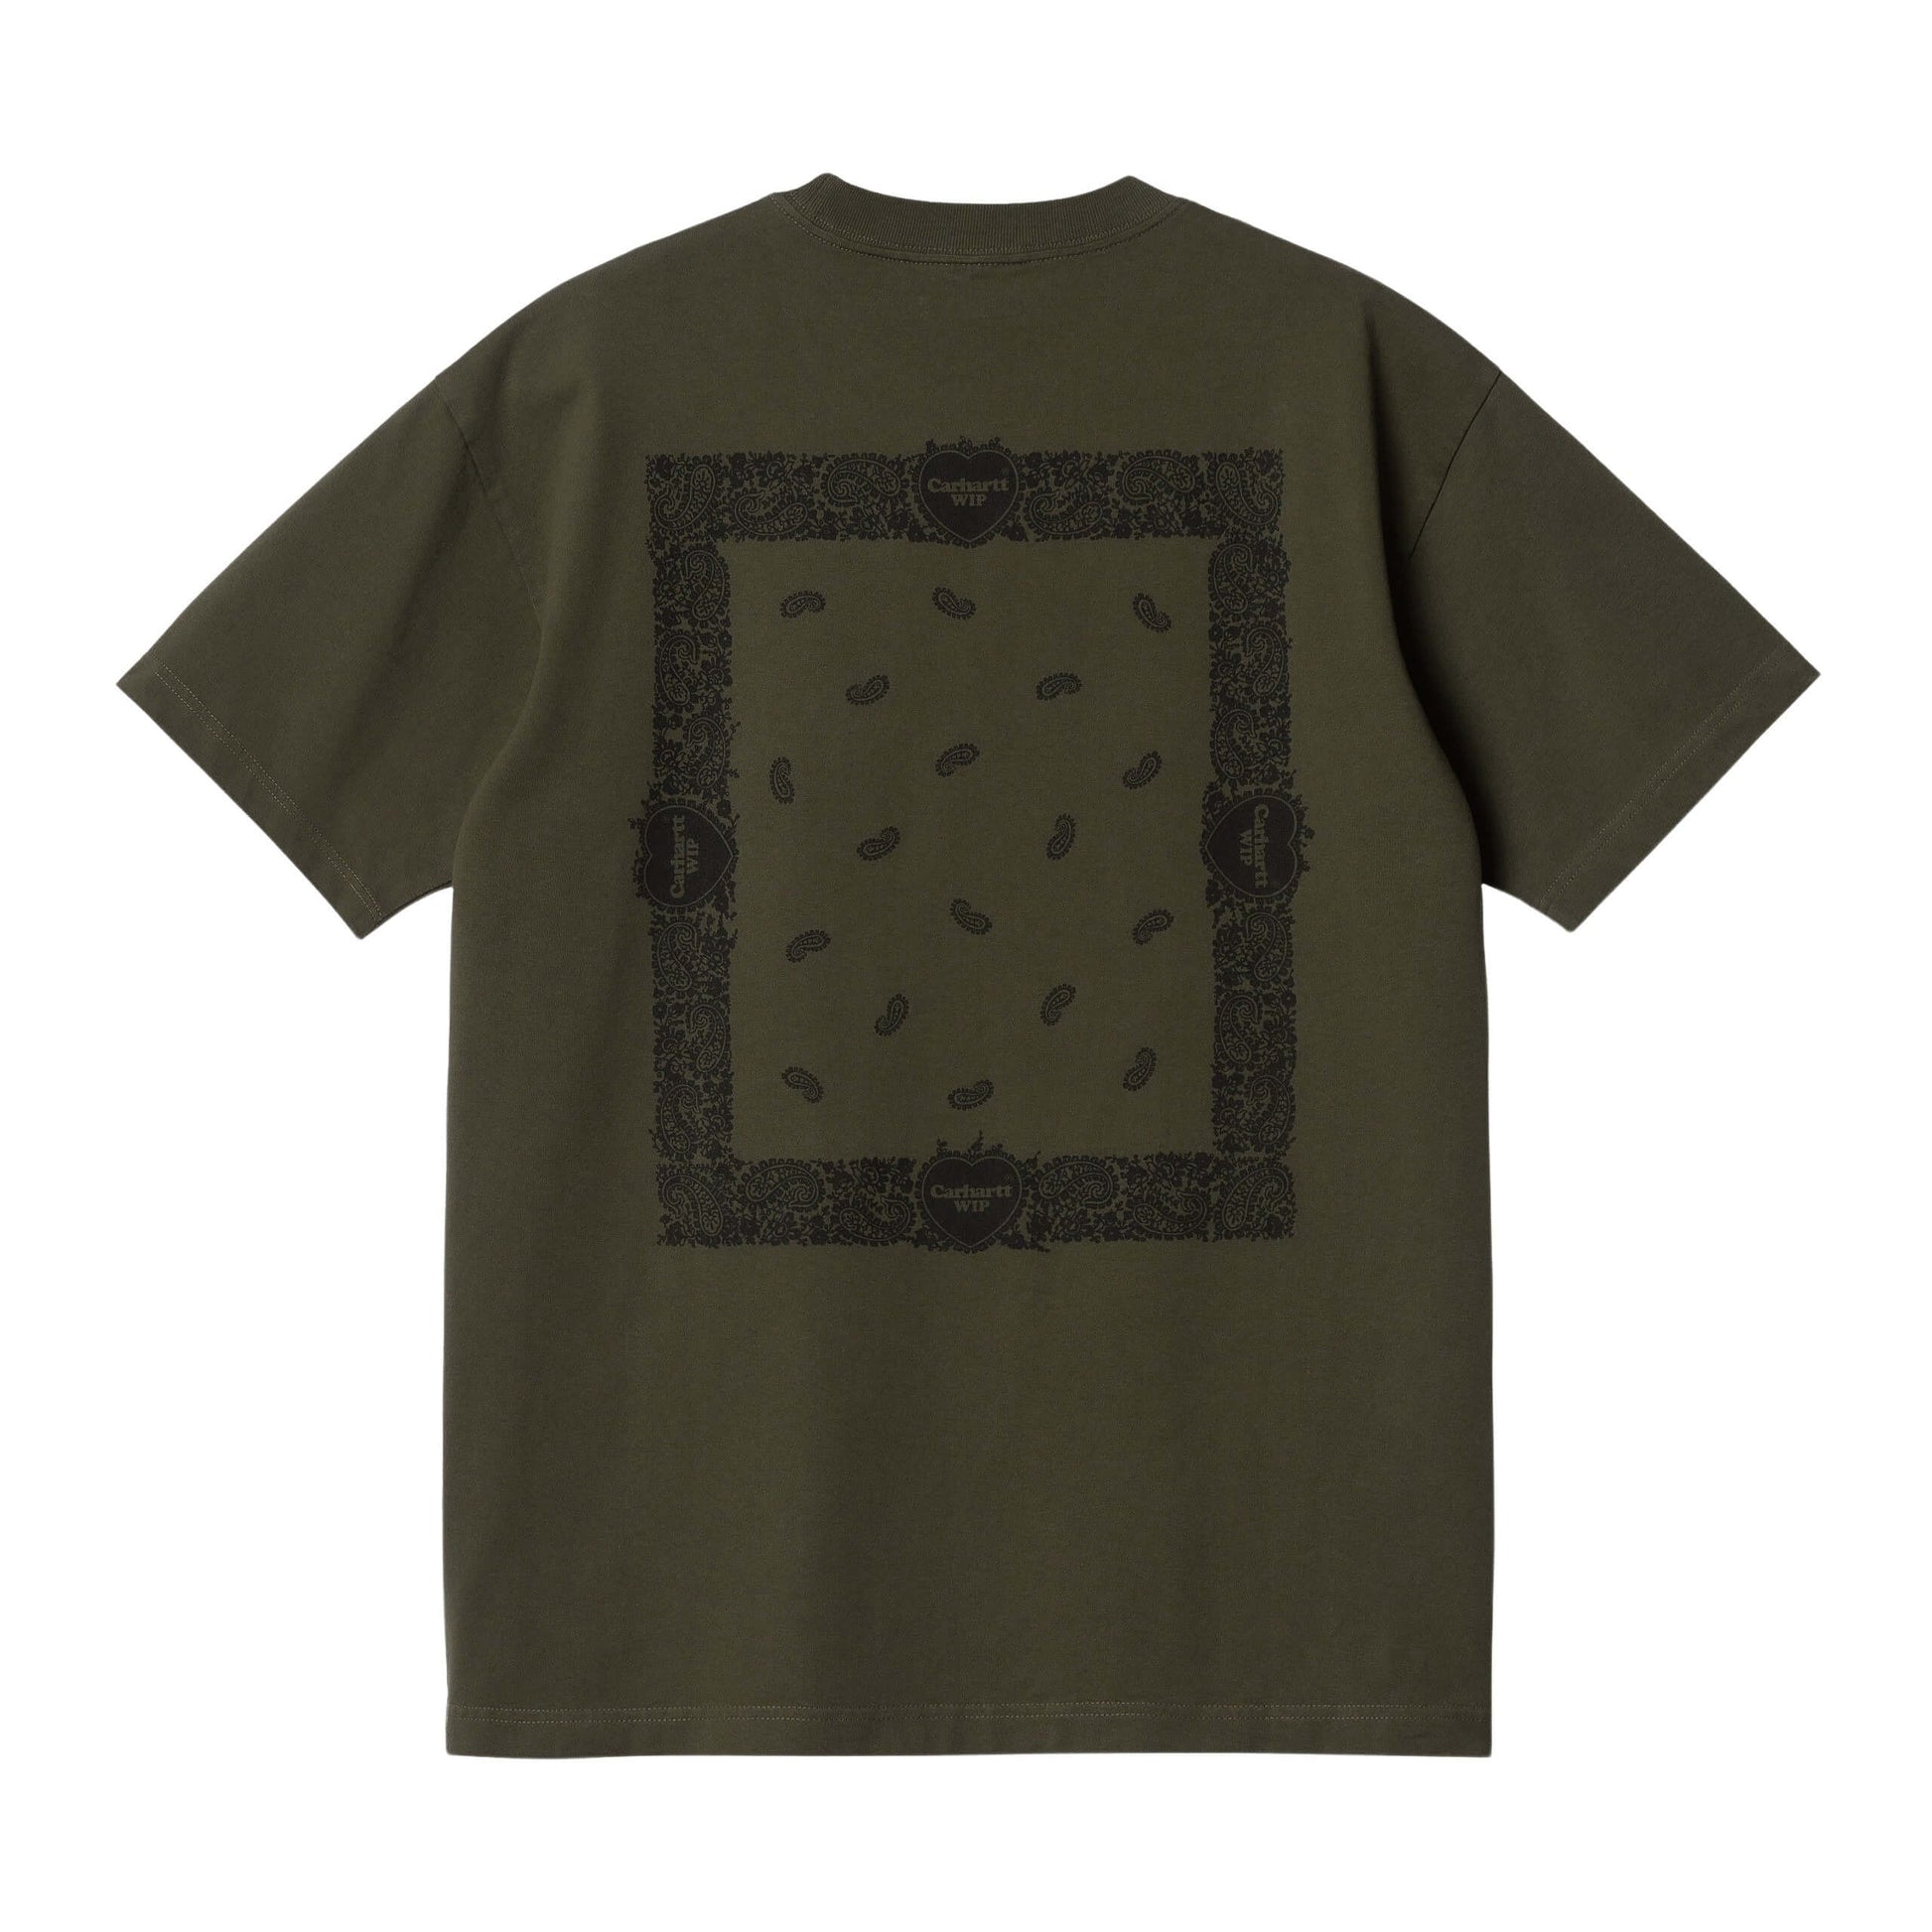 carhartt-wip-s-s-paisley-t-shirt-plant-black-stone-washed